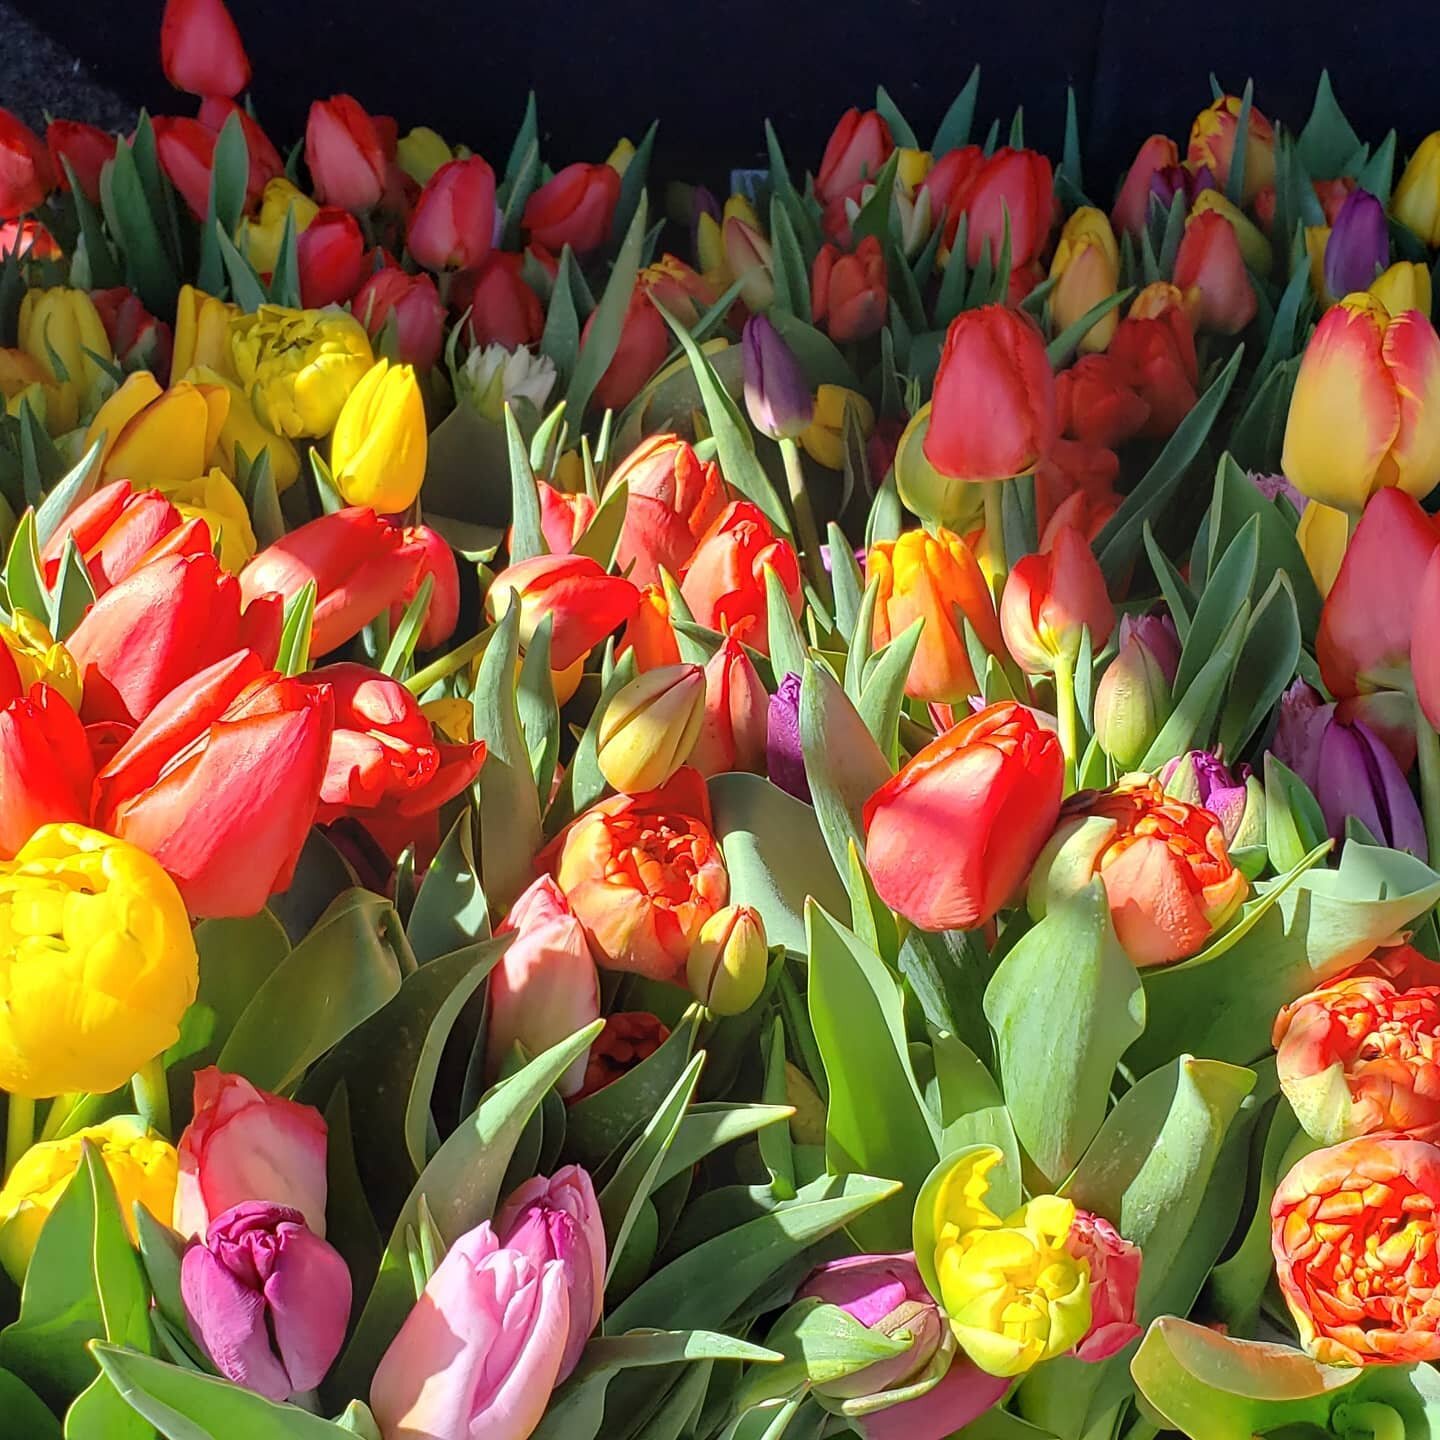 Hey all, back again. If you're stuck in what to buy your special someone for Valentine's Day and don't want to do roses, chocolate etc., we are holding a SALE for our spring tulip CSAs (April through May). Yippee!!! 14% off for the 14th. Discount cod